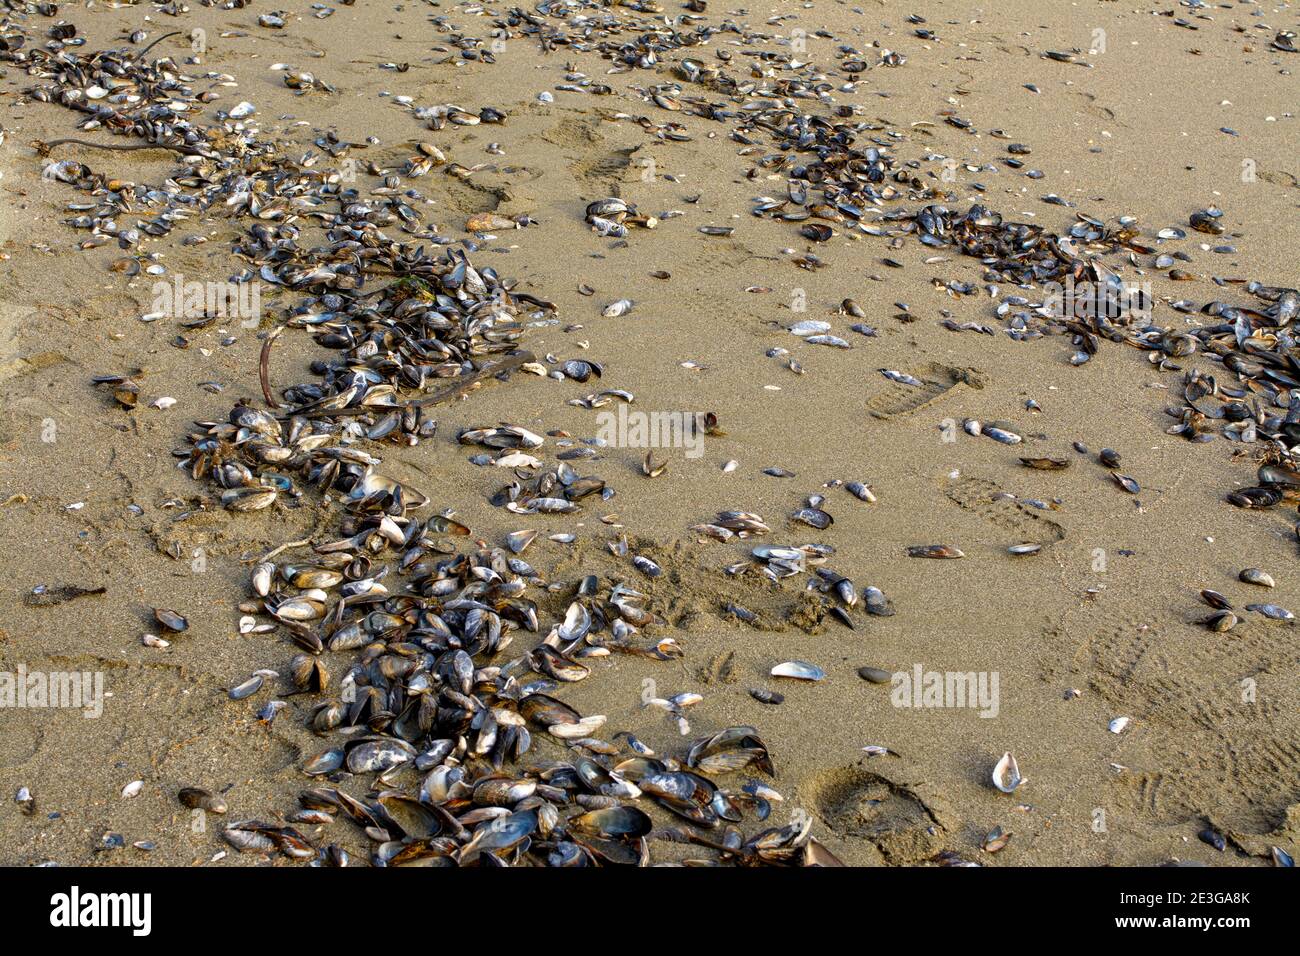 Washed up mussel shells on sandy beach Stock Photo